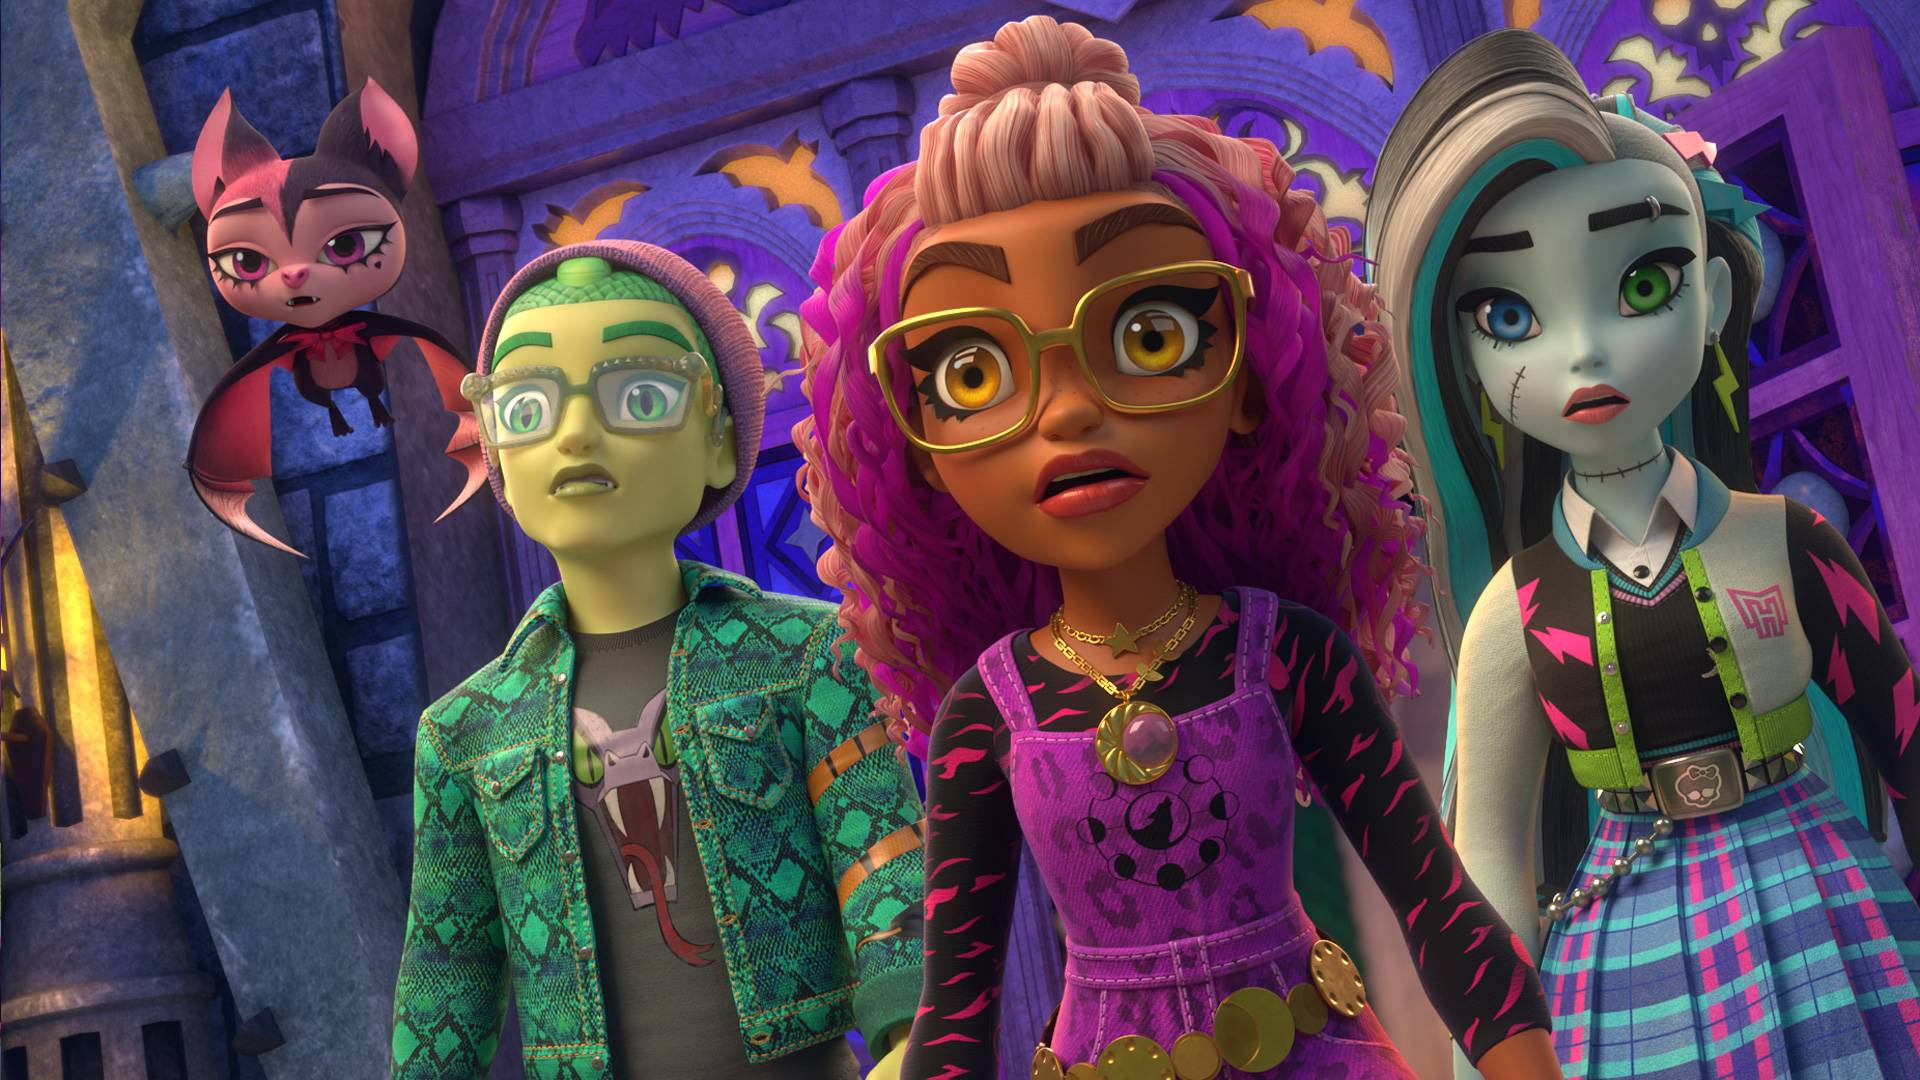 Monster High: Haunted streaming: where to watch online?